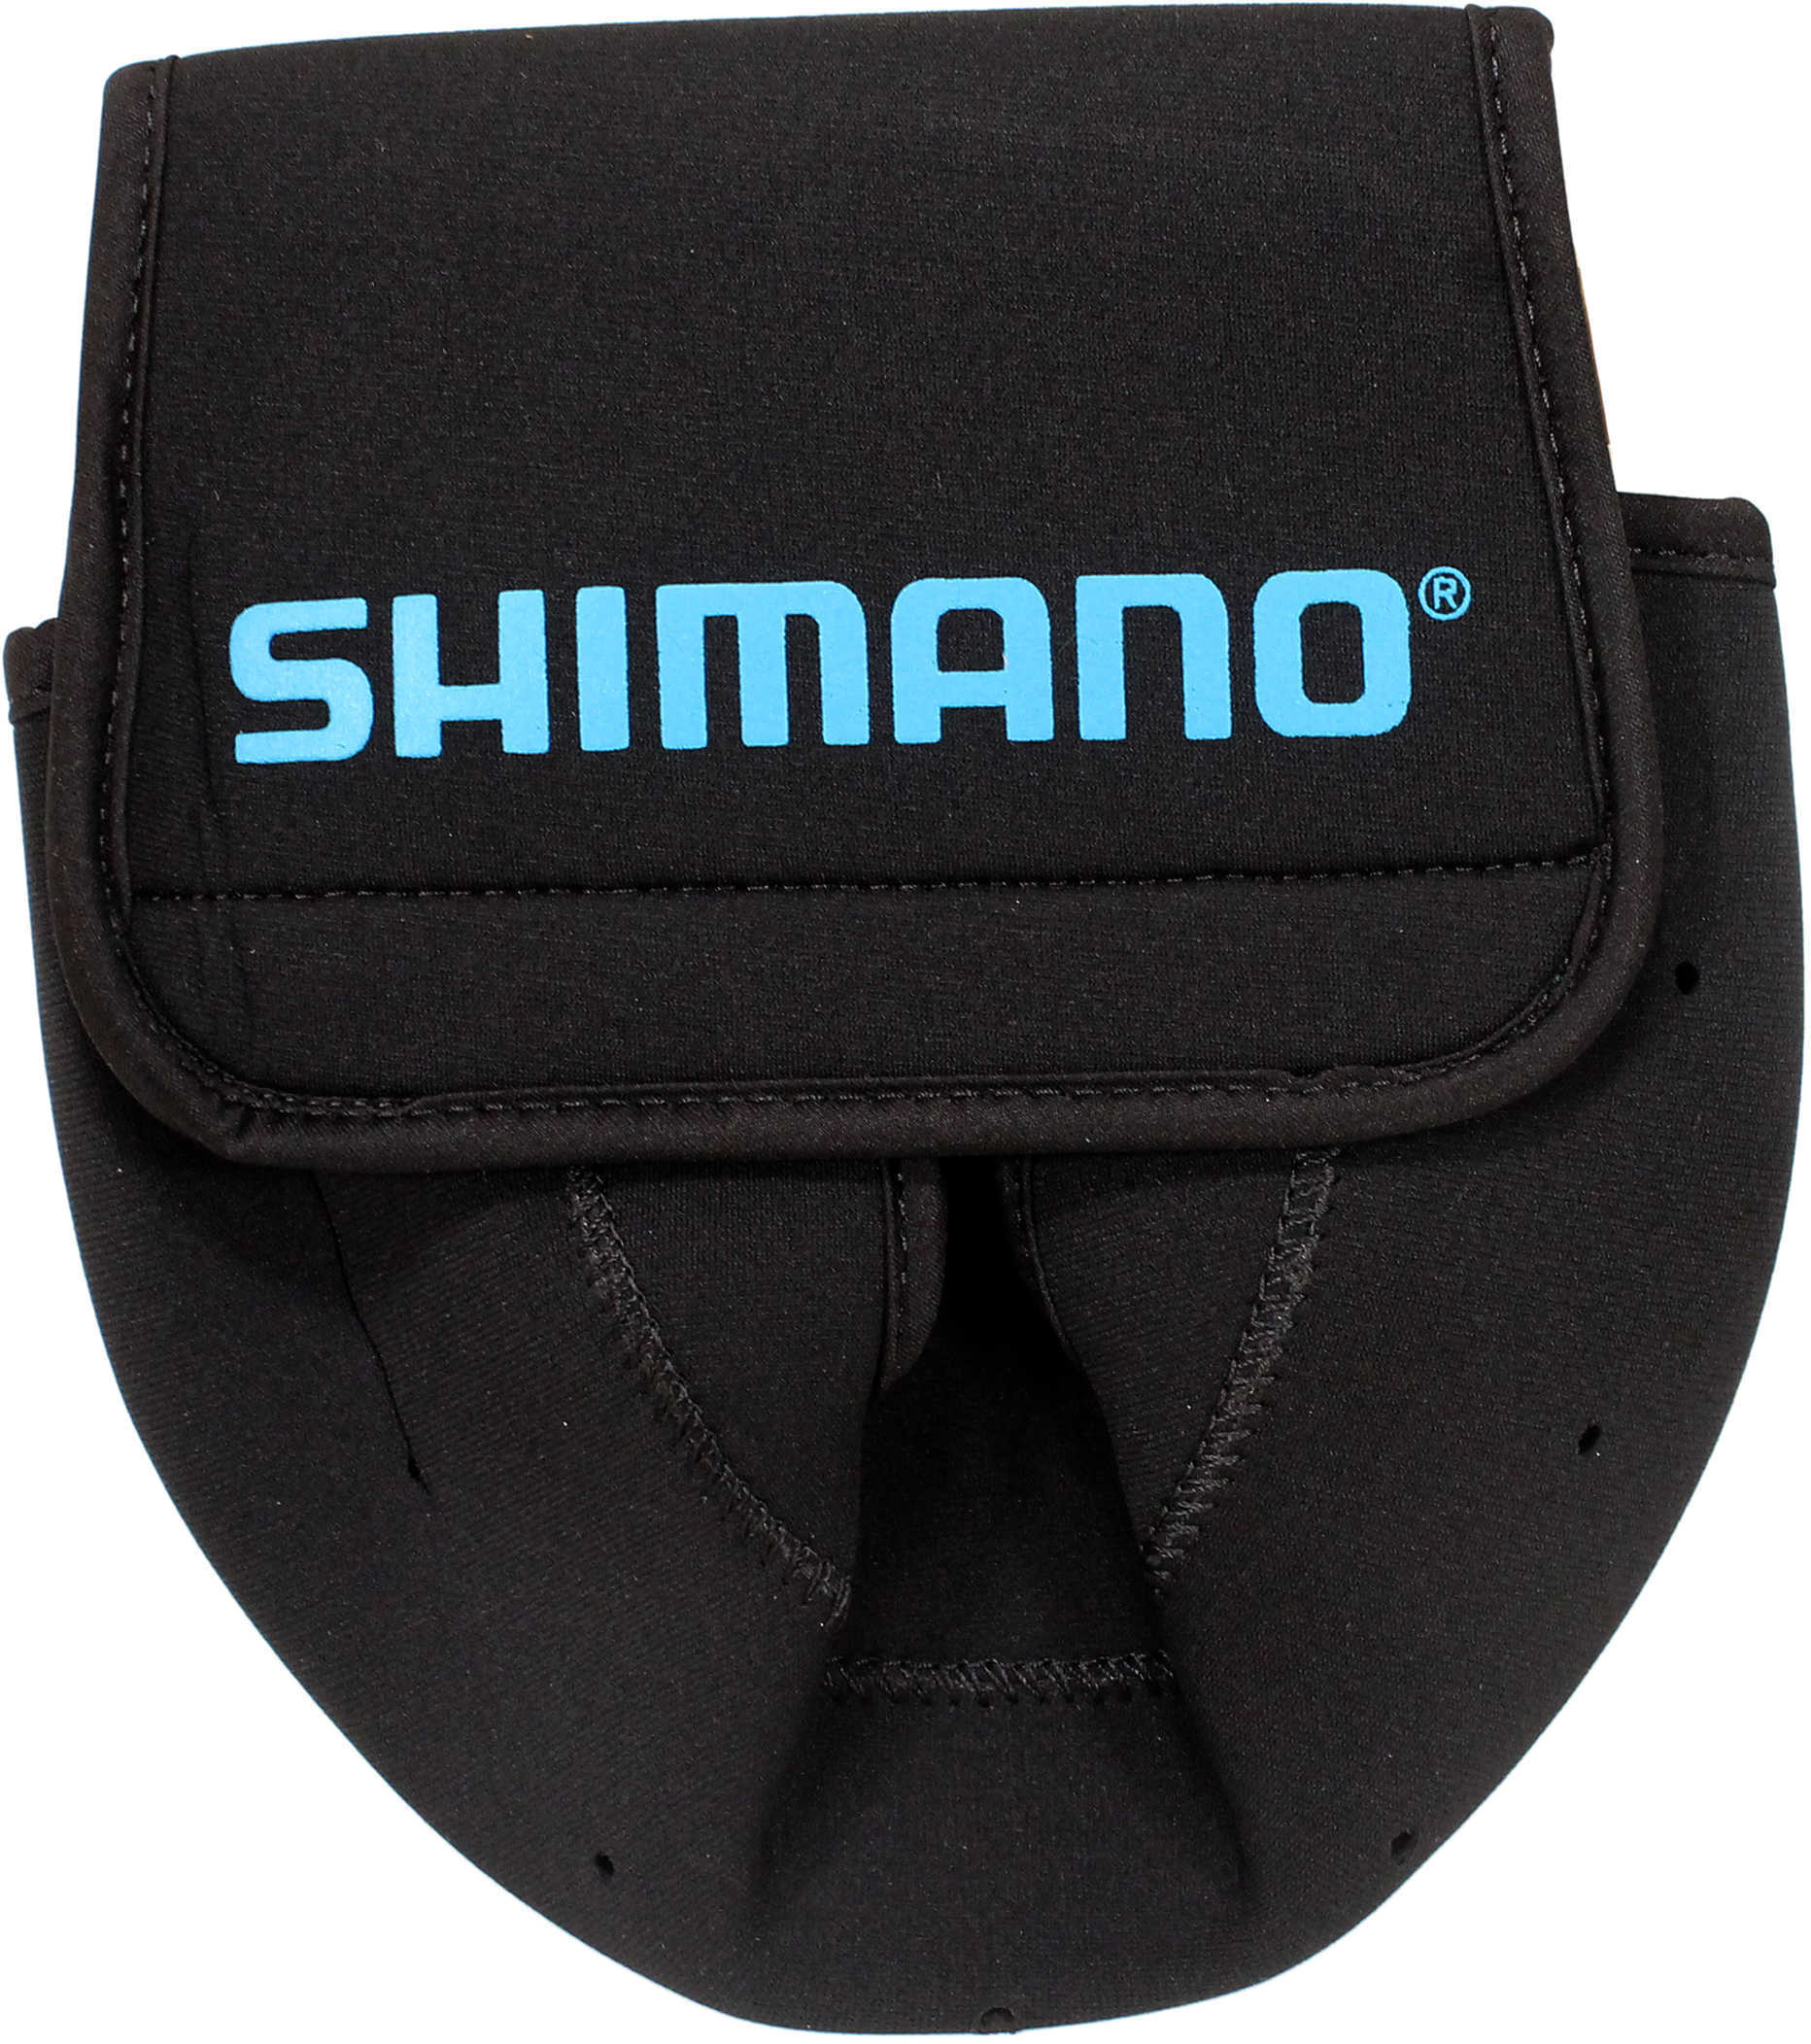 Shimano Neoprene Spinning Reel Cover Large, Black Md: ANSC850A